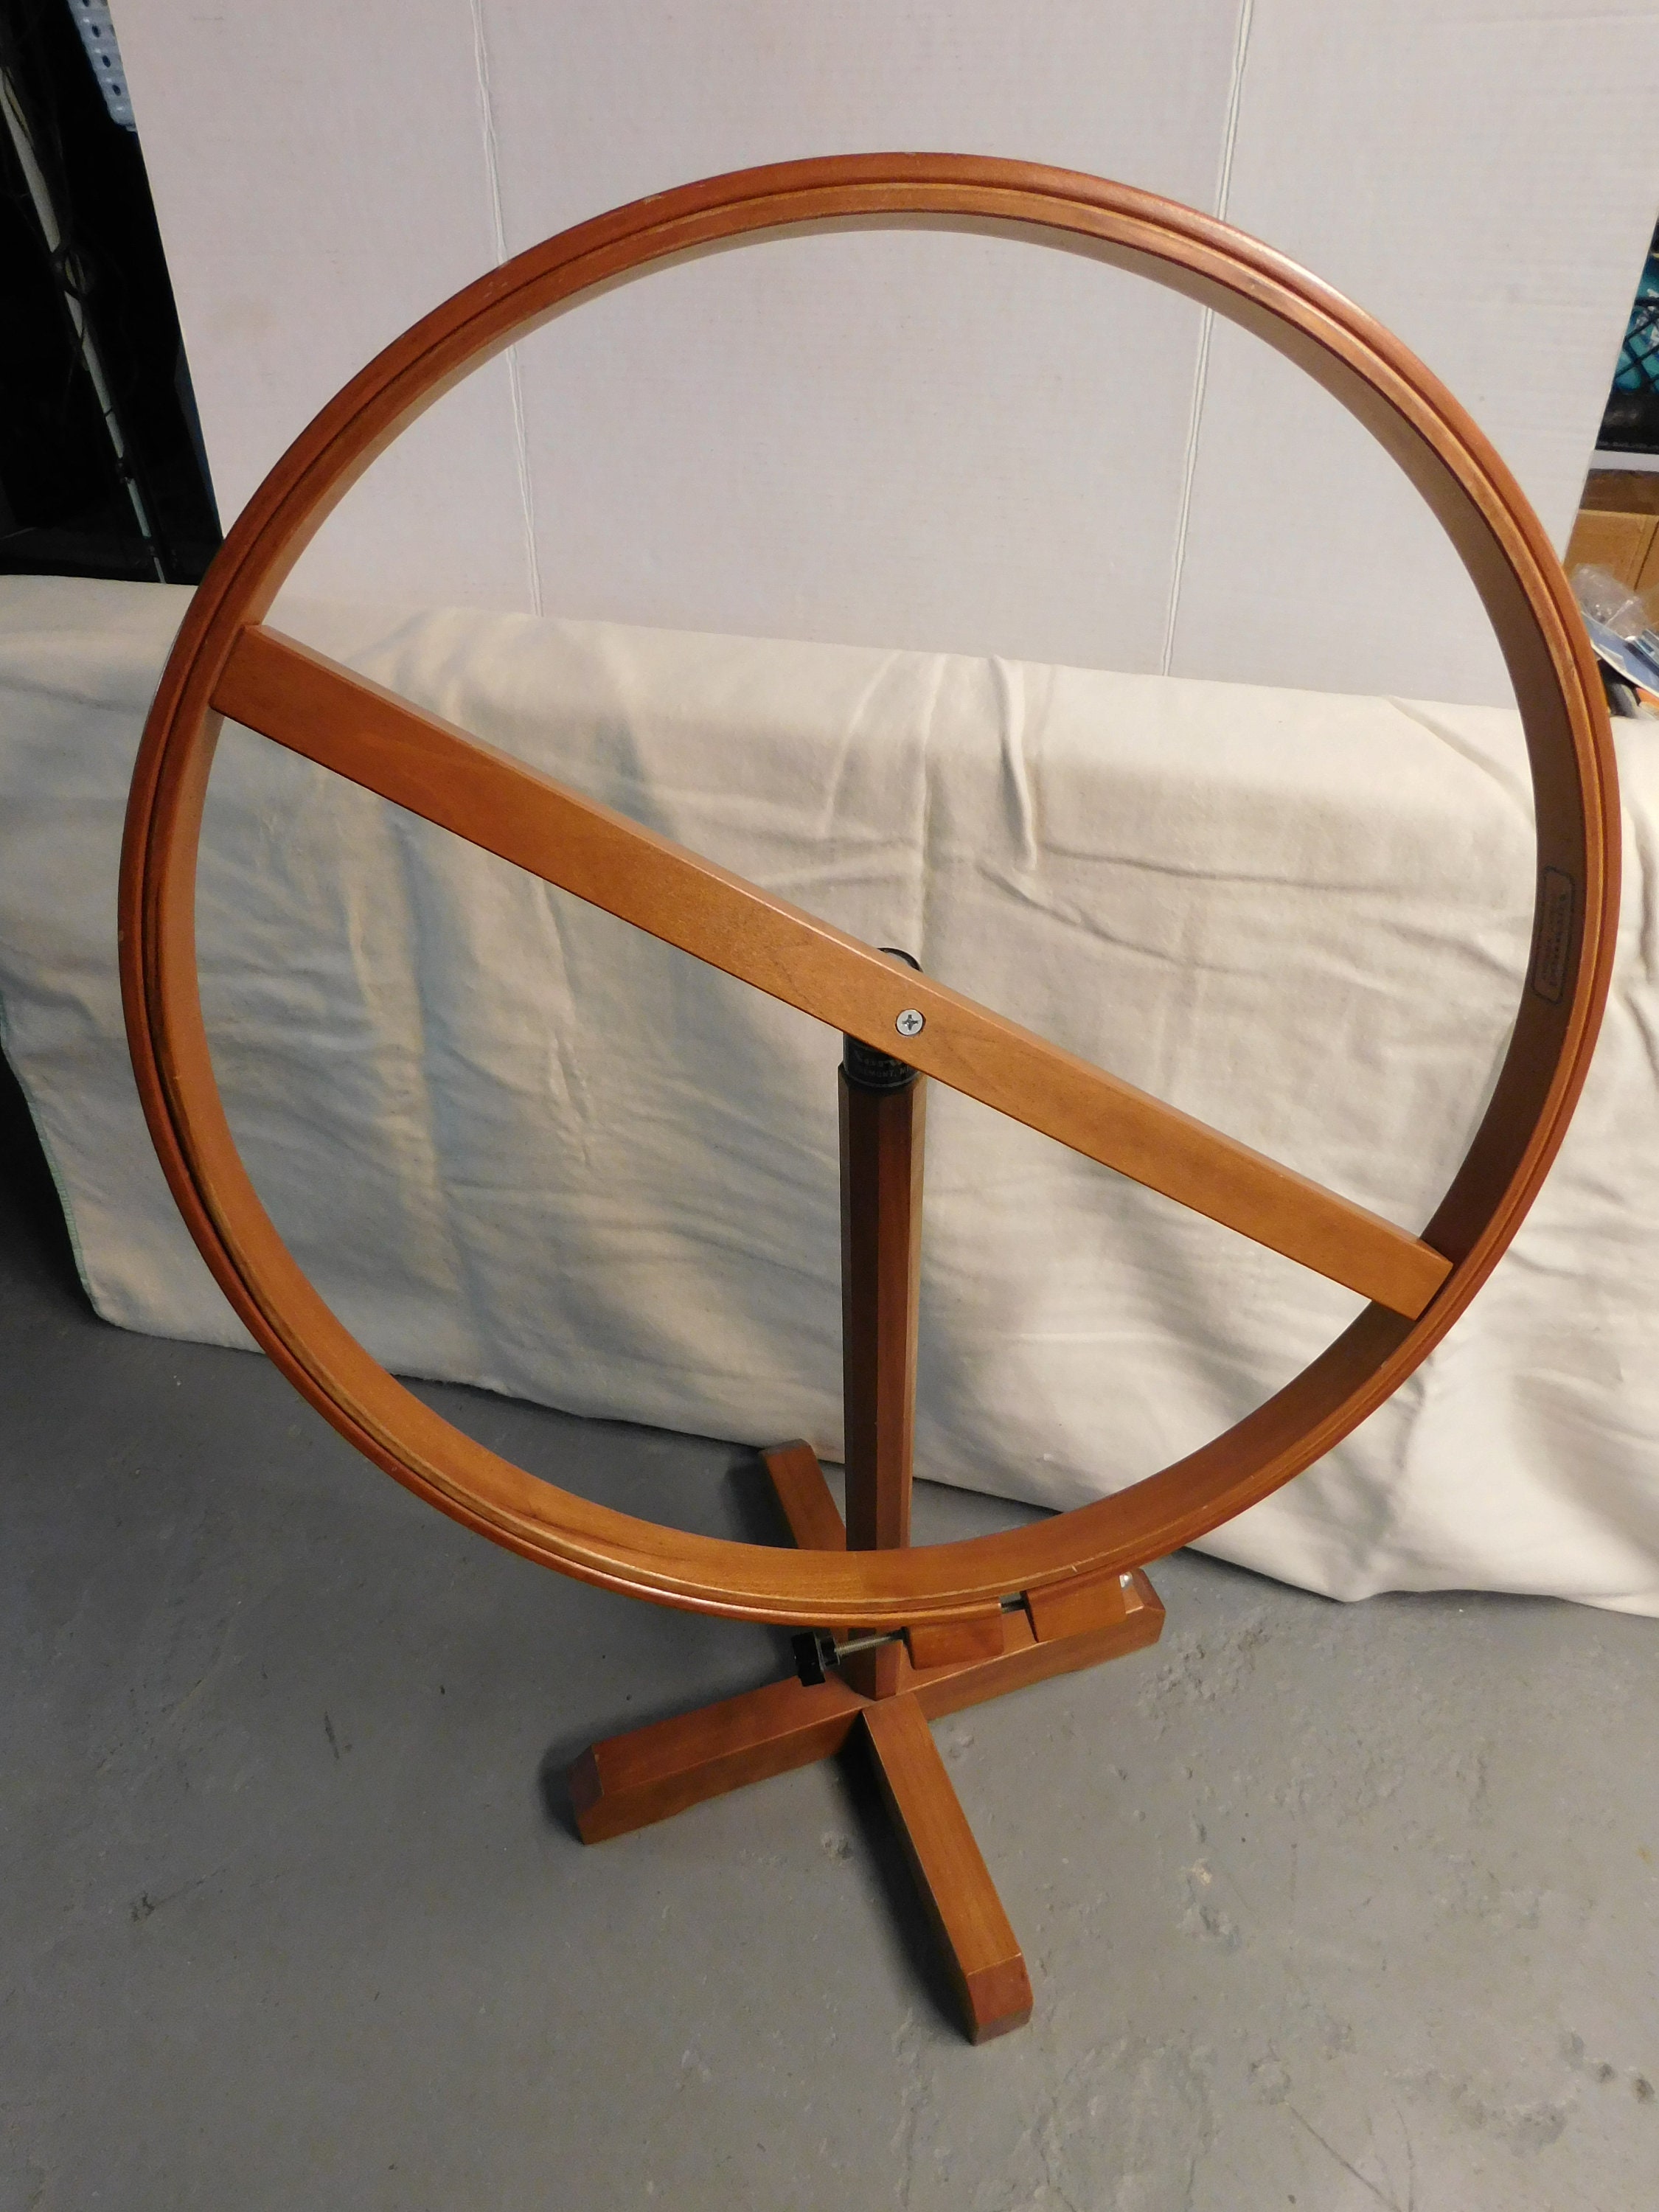 9 Perfect Quilting Hoop Stand Gallery